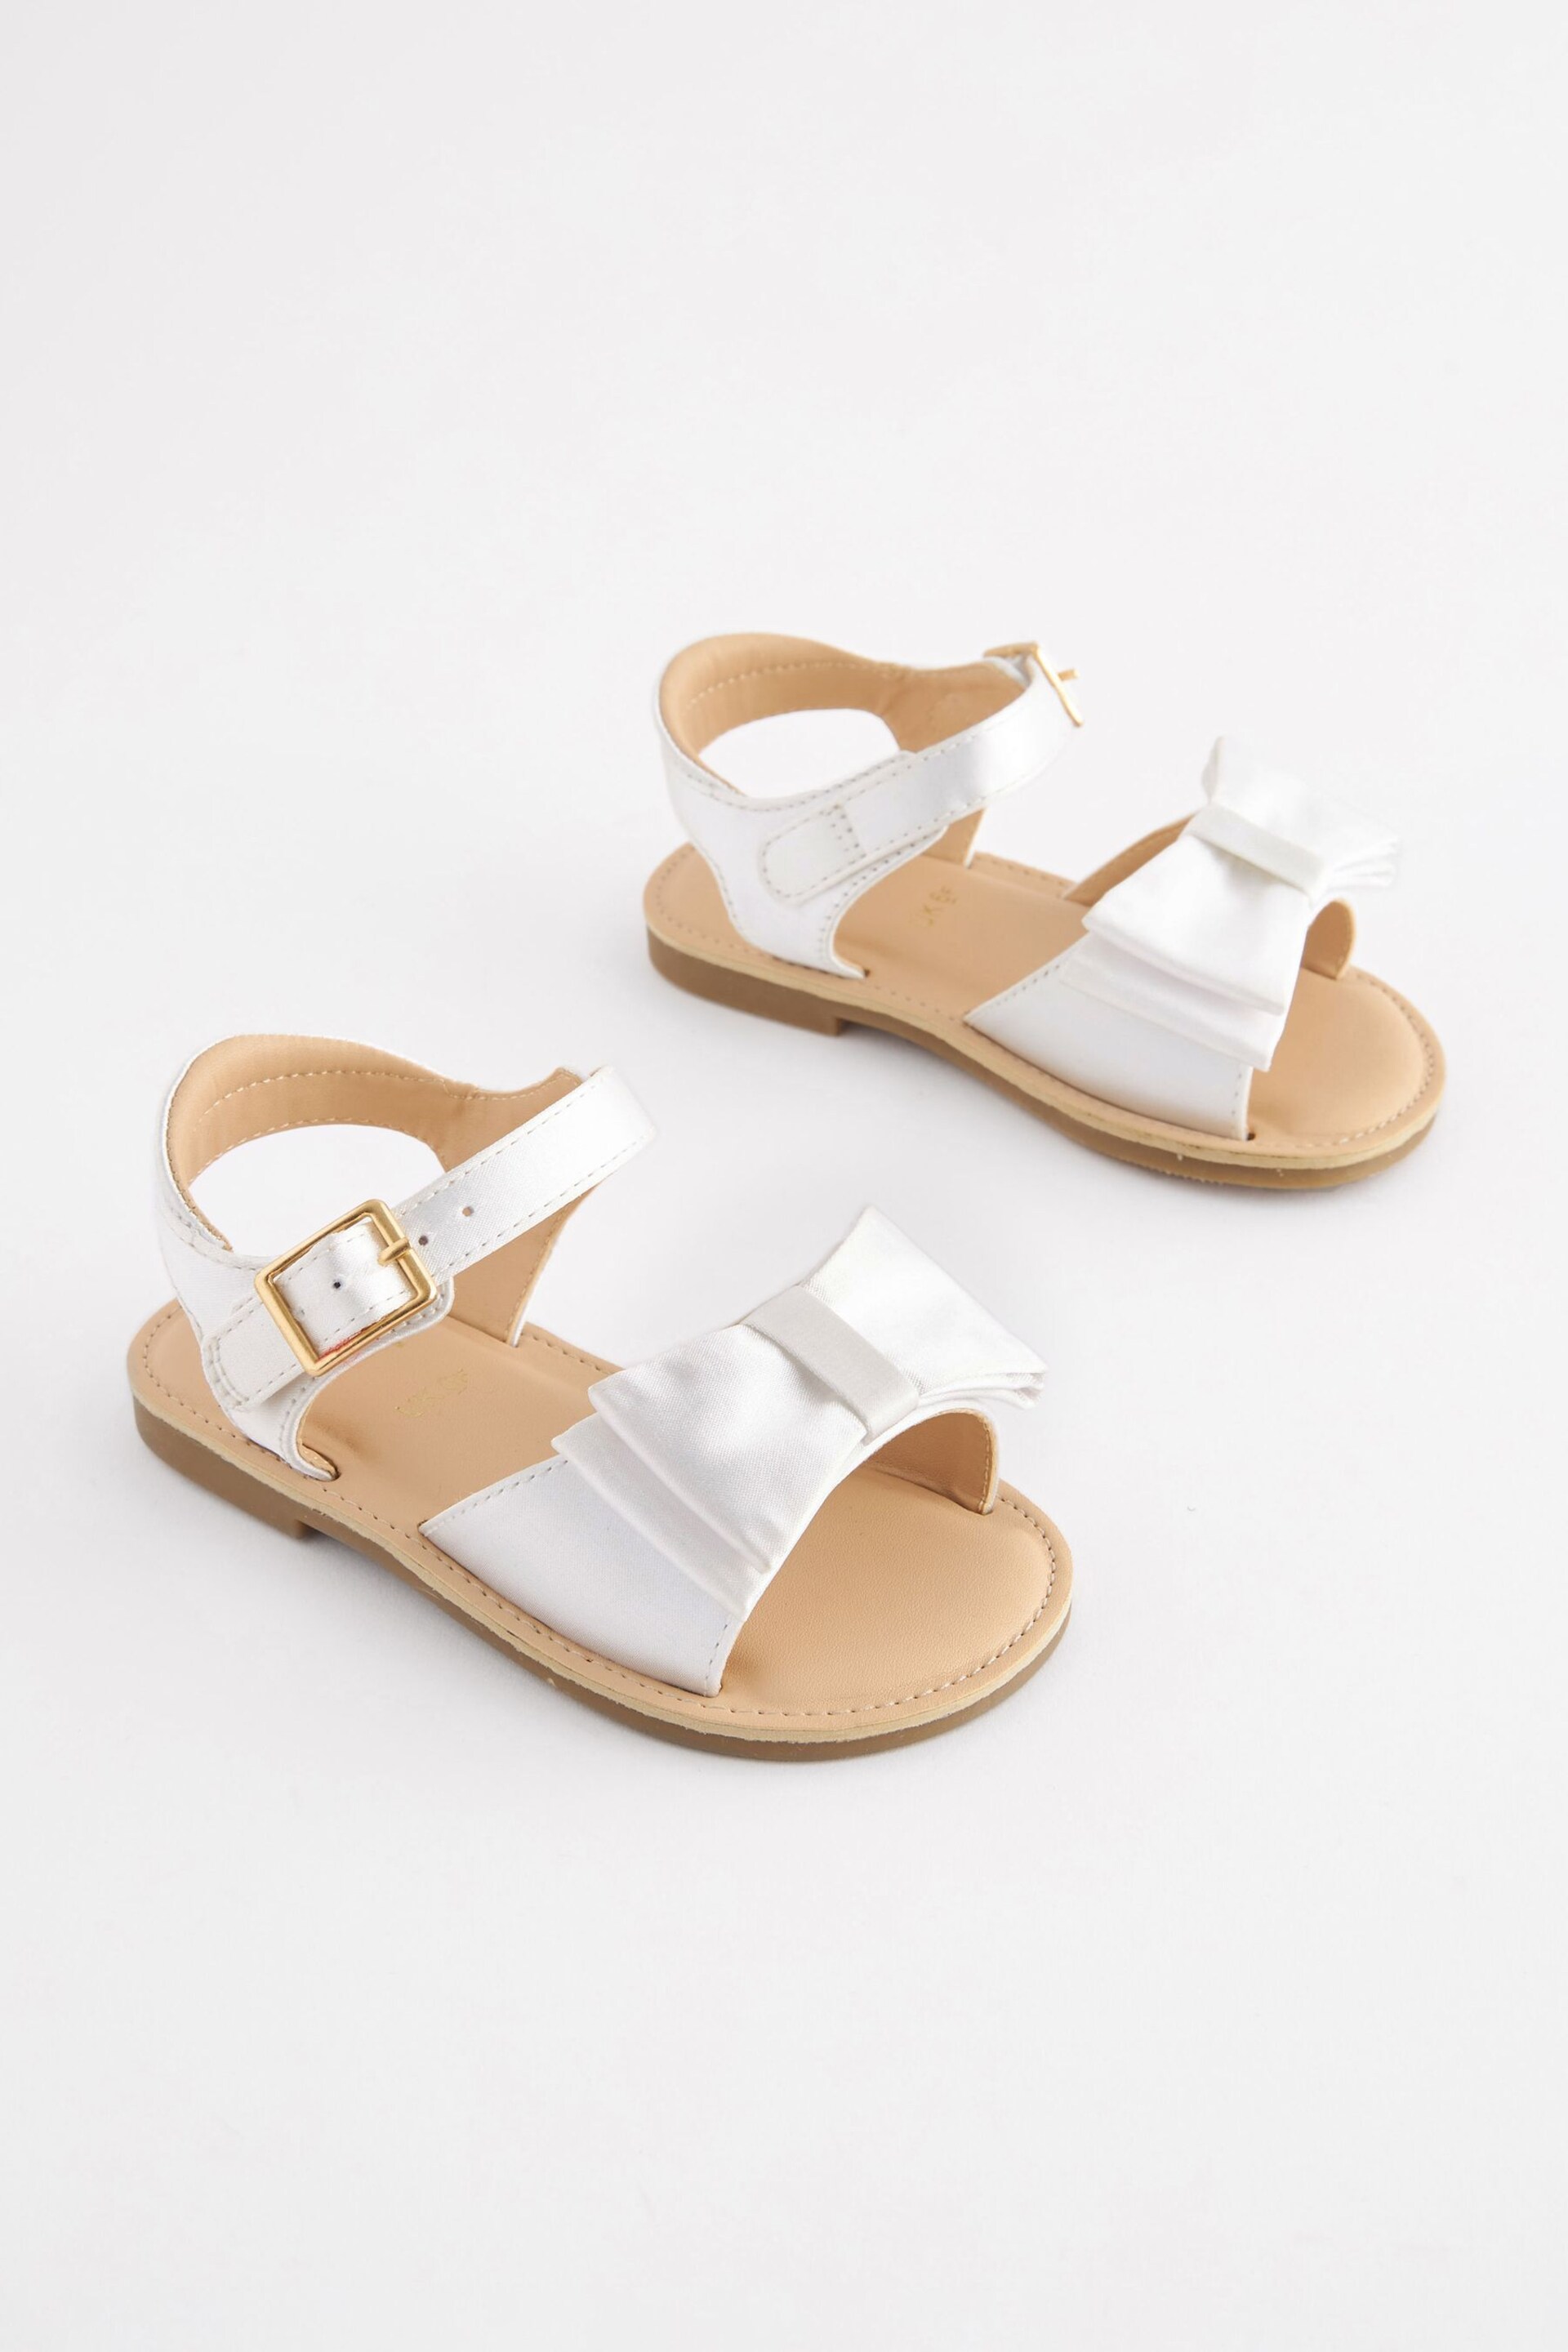 White Wide Fit (G) Satin Bridesmaid Bow Sandals - Image 5 of 10